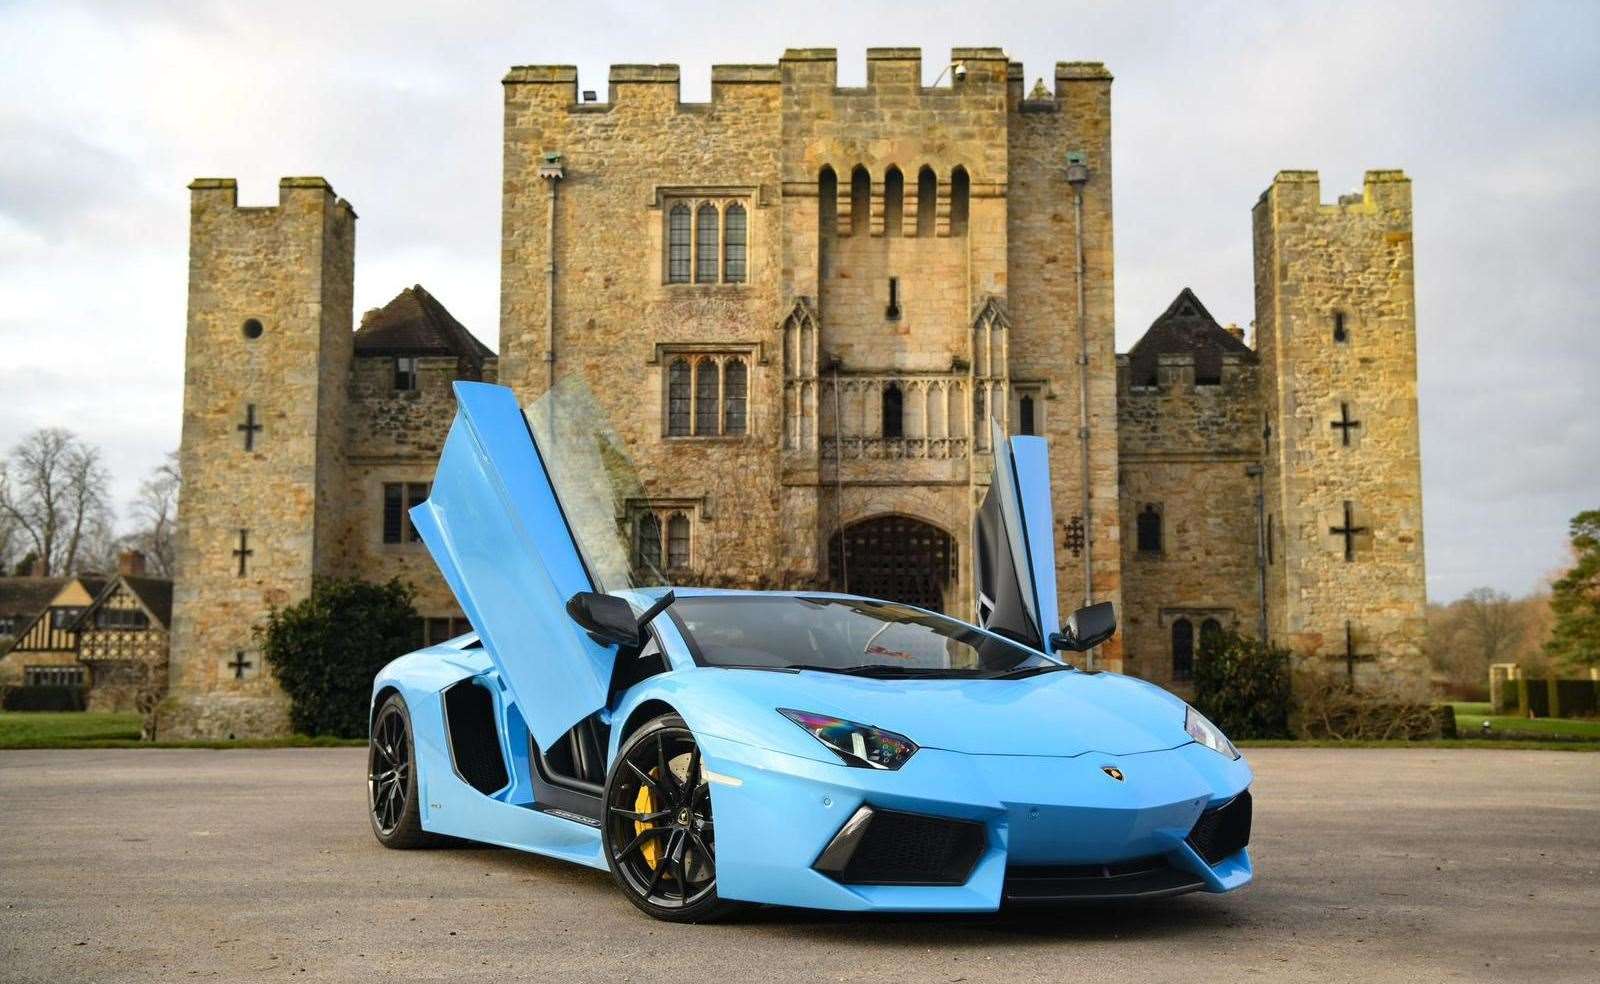 Supercars, a display of high-performances vehicles, will take place at Hever Castle. Picture: Hever Castle and Gardens